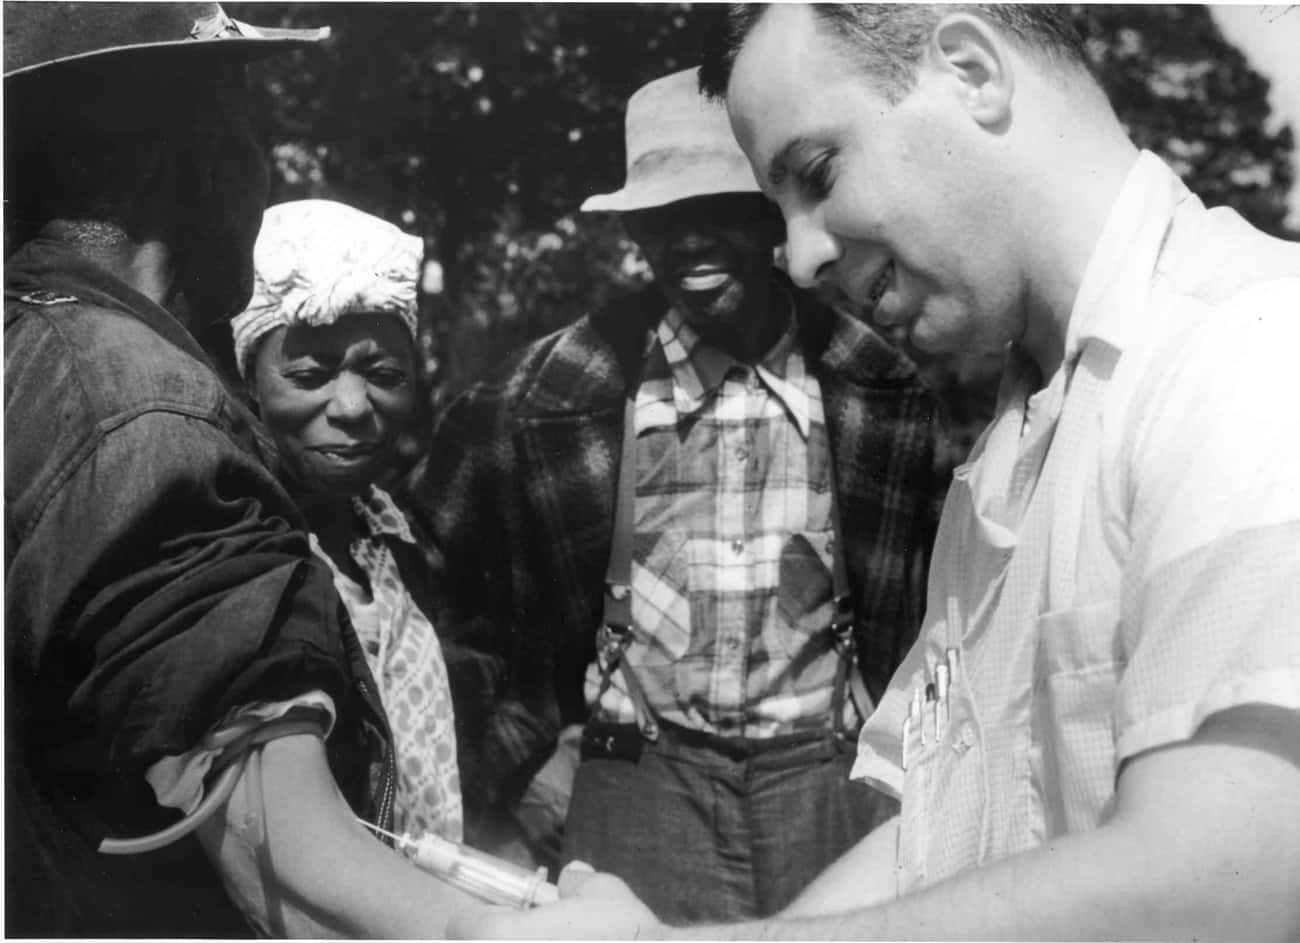 The Tuskegee Study Withheld Treatment From Men With Syphilis